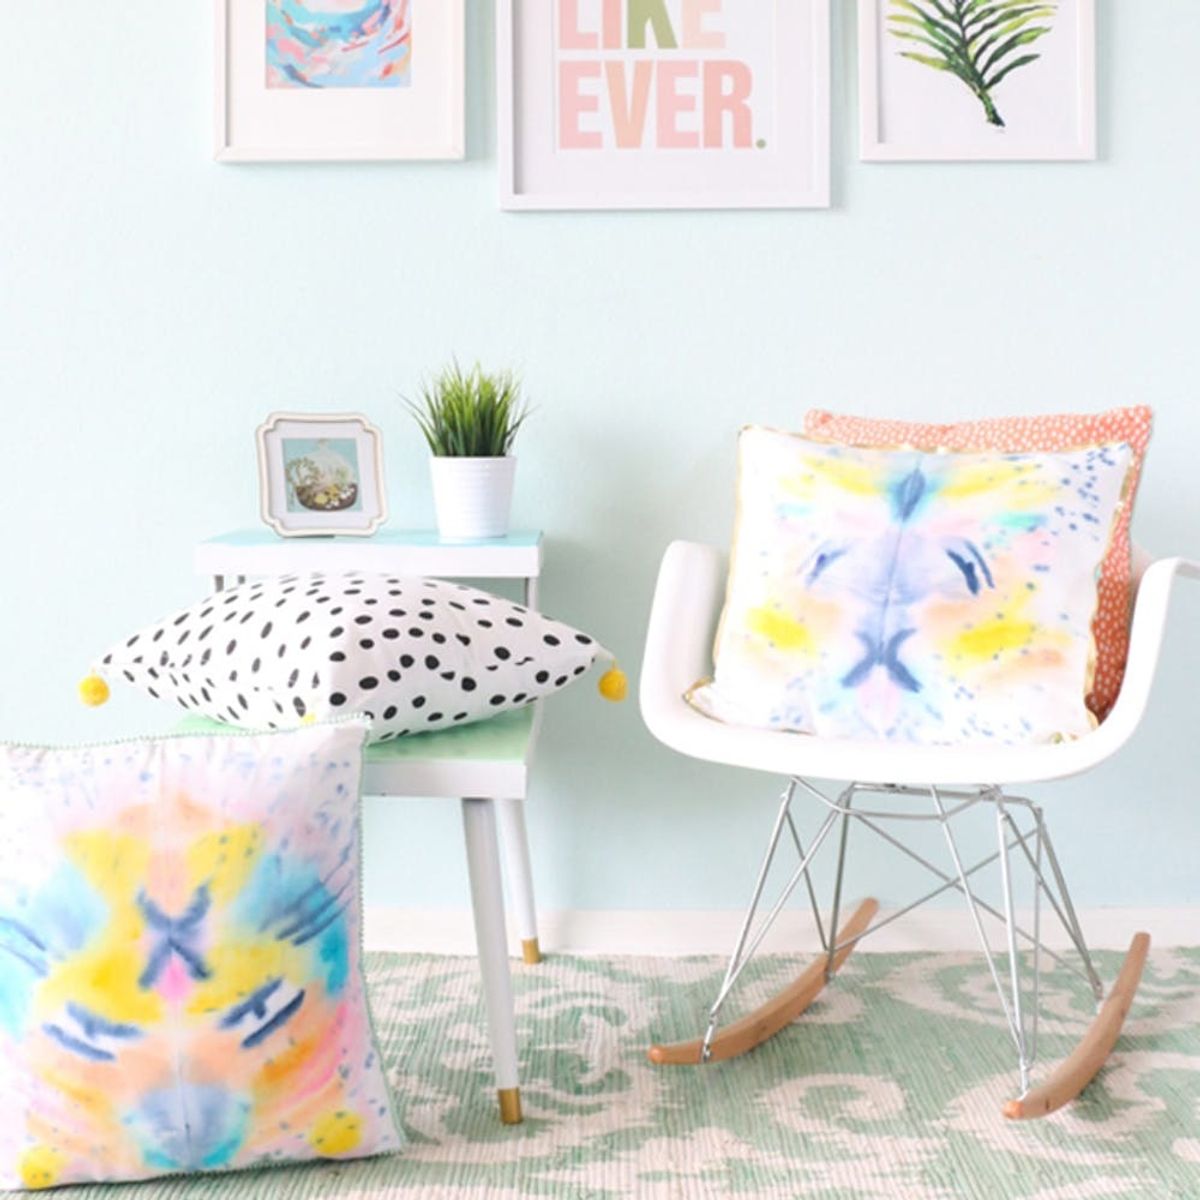 11 Sewing DIYs for a Spring Living Room Refresh